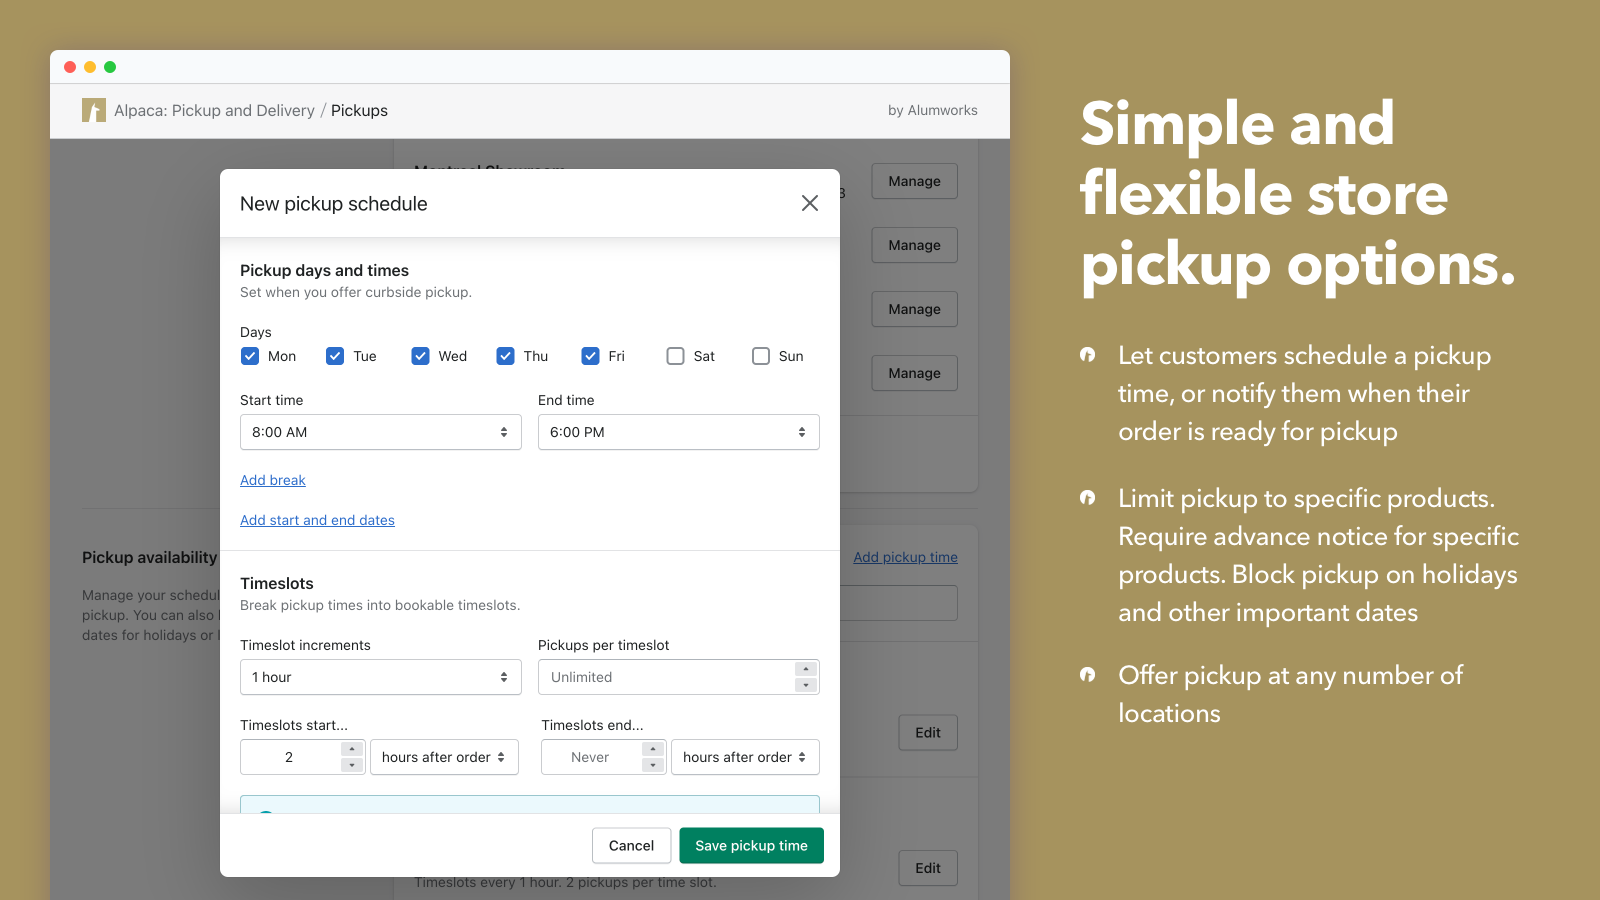 Simple and flexible store pickup options.